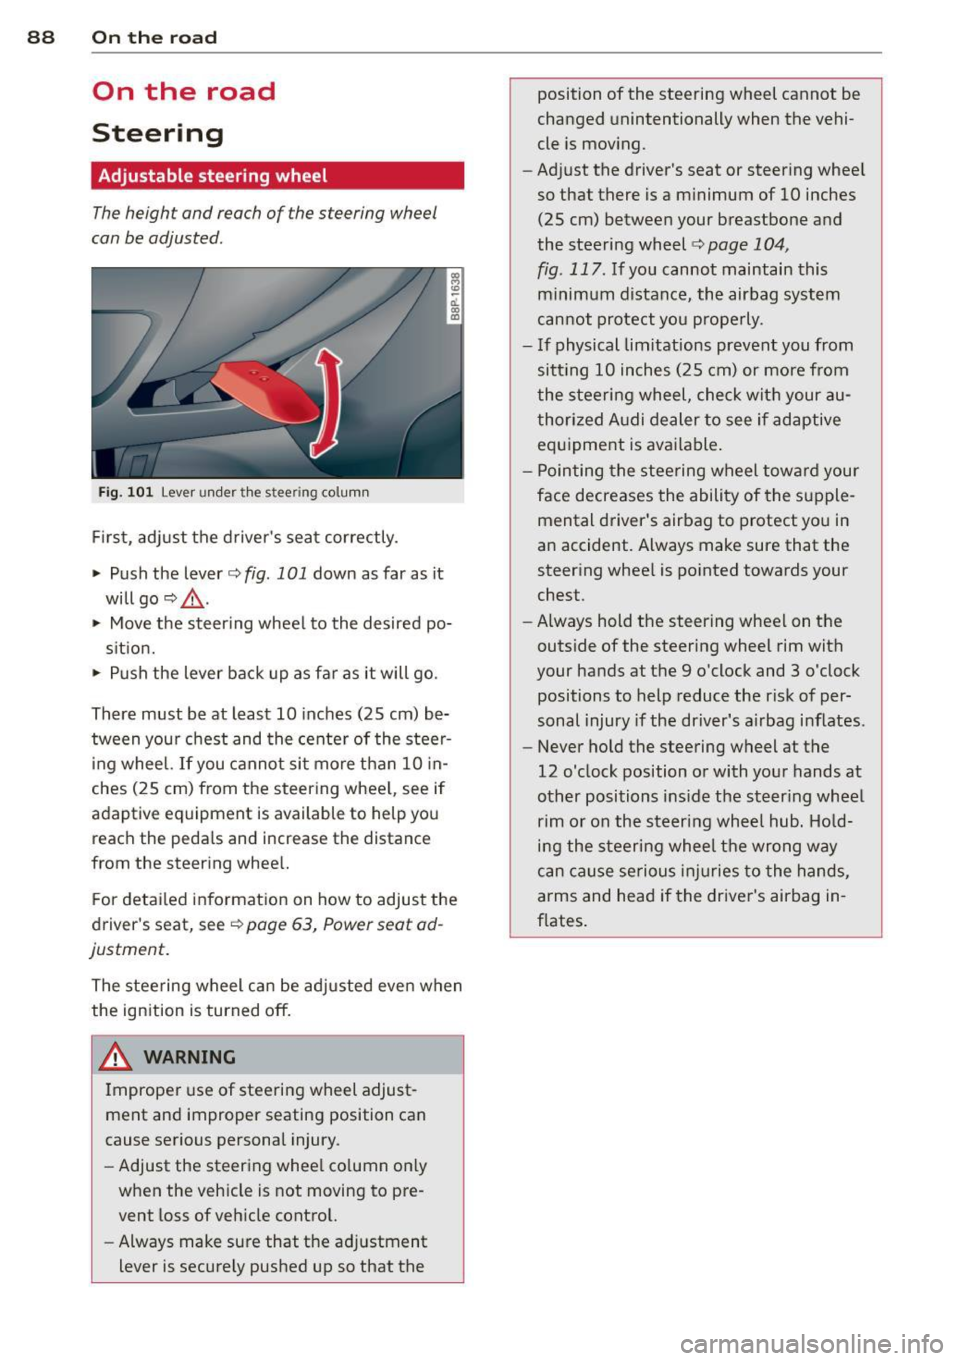 AUDI A3 2012  Owner´s Manual 88  On  the  road 
On  the  road 
Steering 
Adjustable steering wheel 
The height  and  reach of  the steering  wheel 
can be adjusted . 
Fig.  101 Lever under  the  steering  column 
First,  adjust  